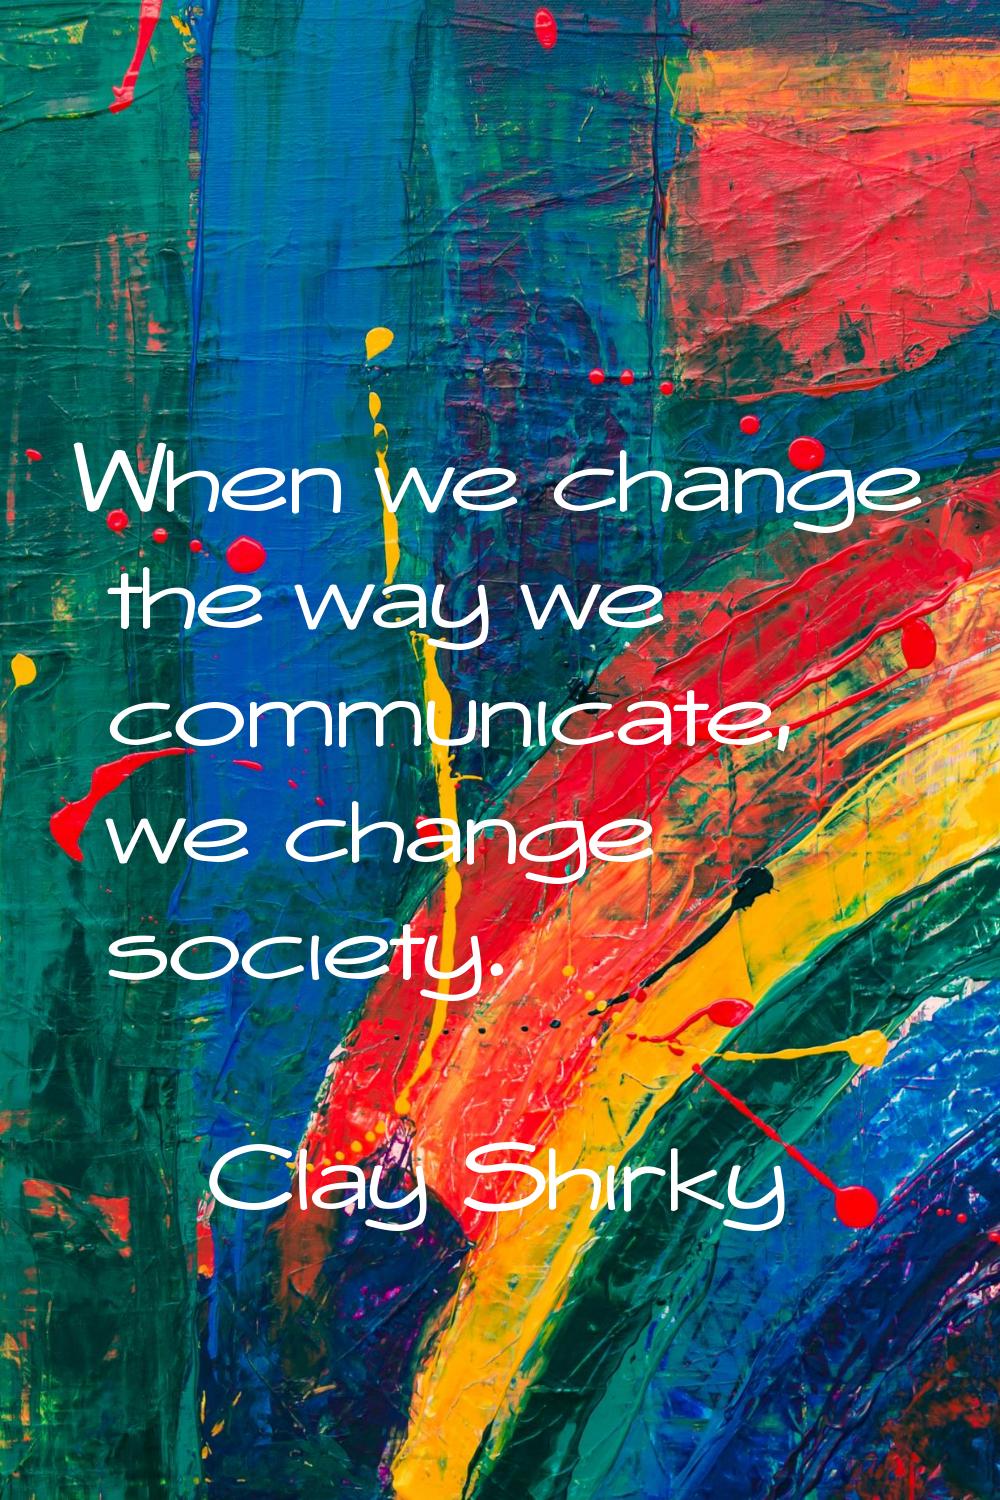 When we change the way we communicate, we change society.